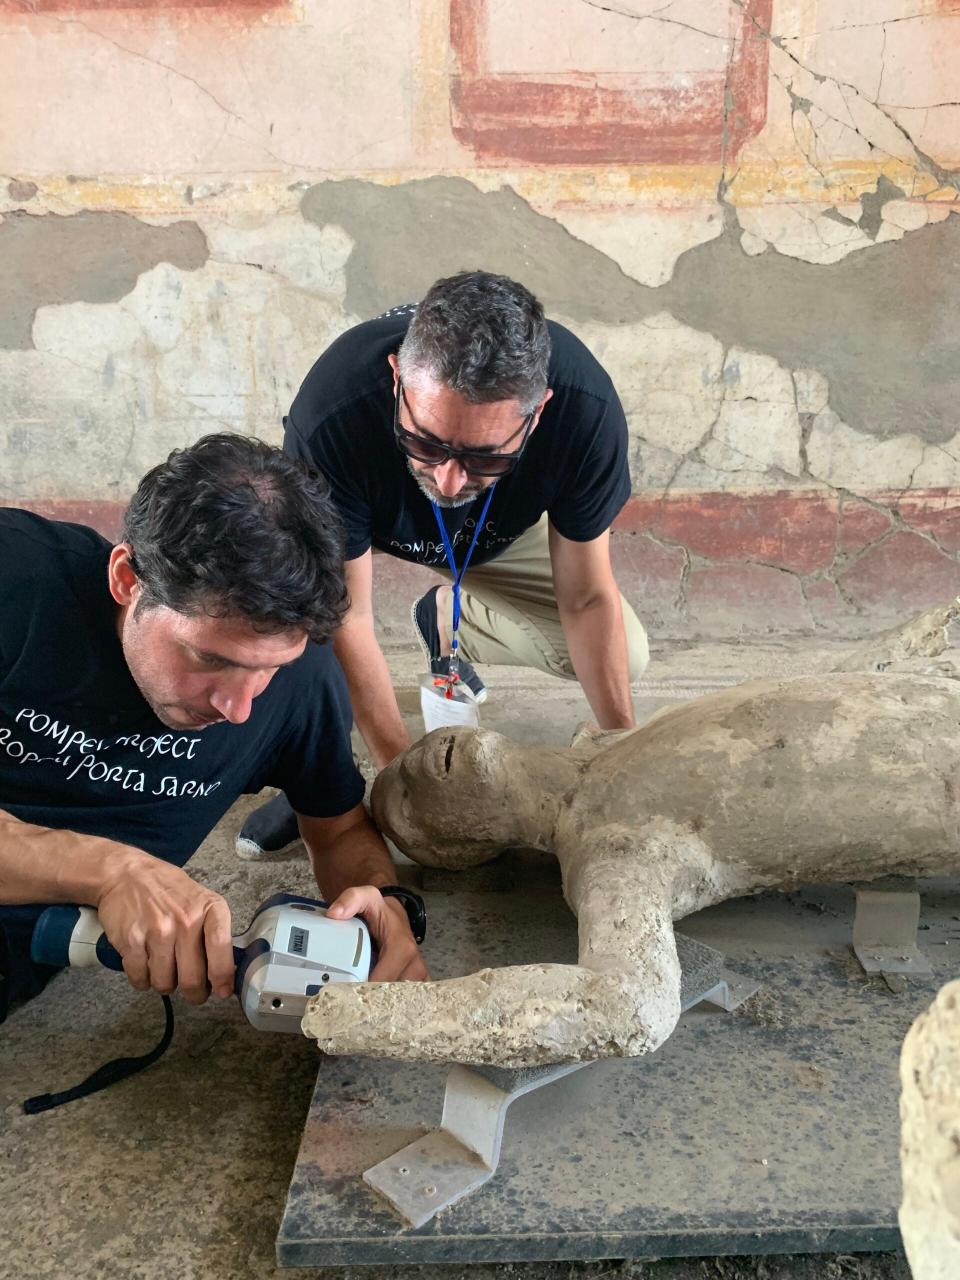 <em>Gianni Gallello (in the front) measuring Cast #57 by pXRF, together with Llorenç Alapon (in the back) at Pompeii Archaeological Park. CREDIT: Alapont et al.</em>